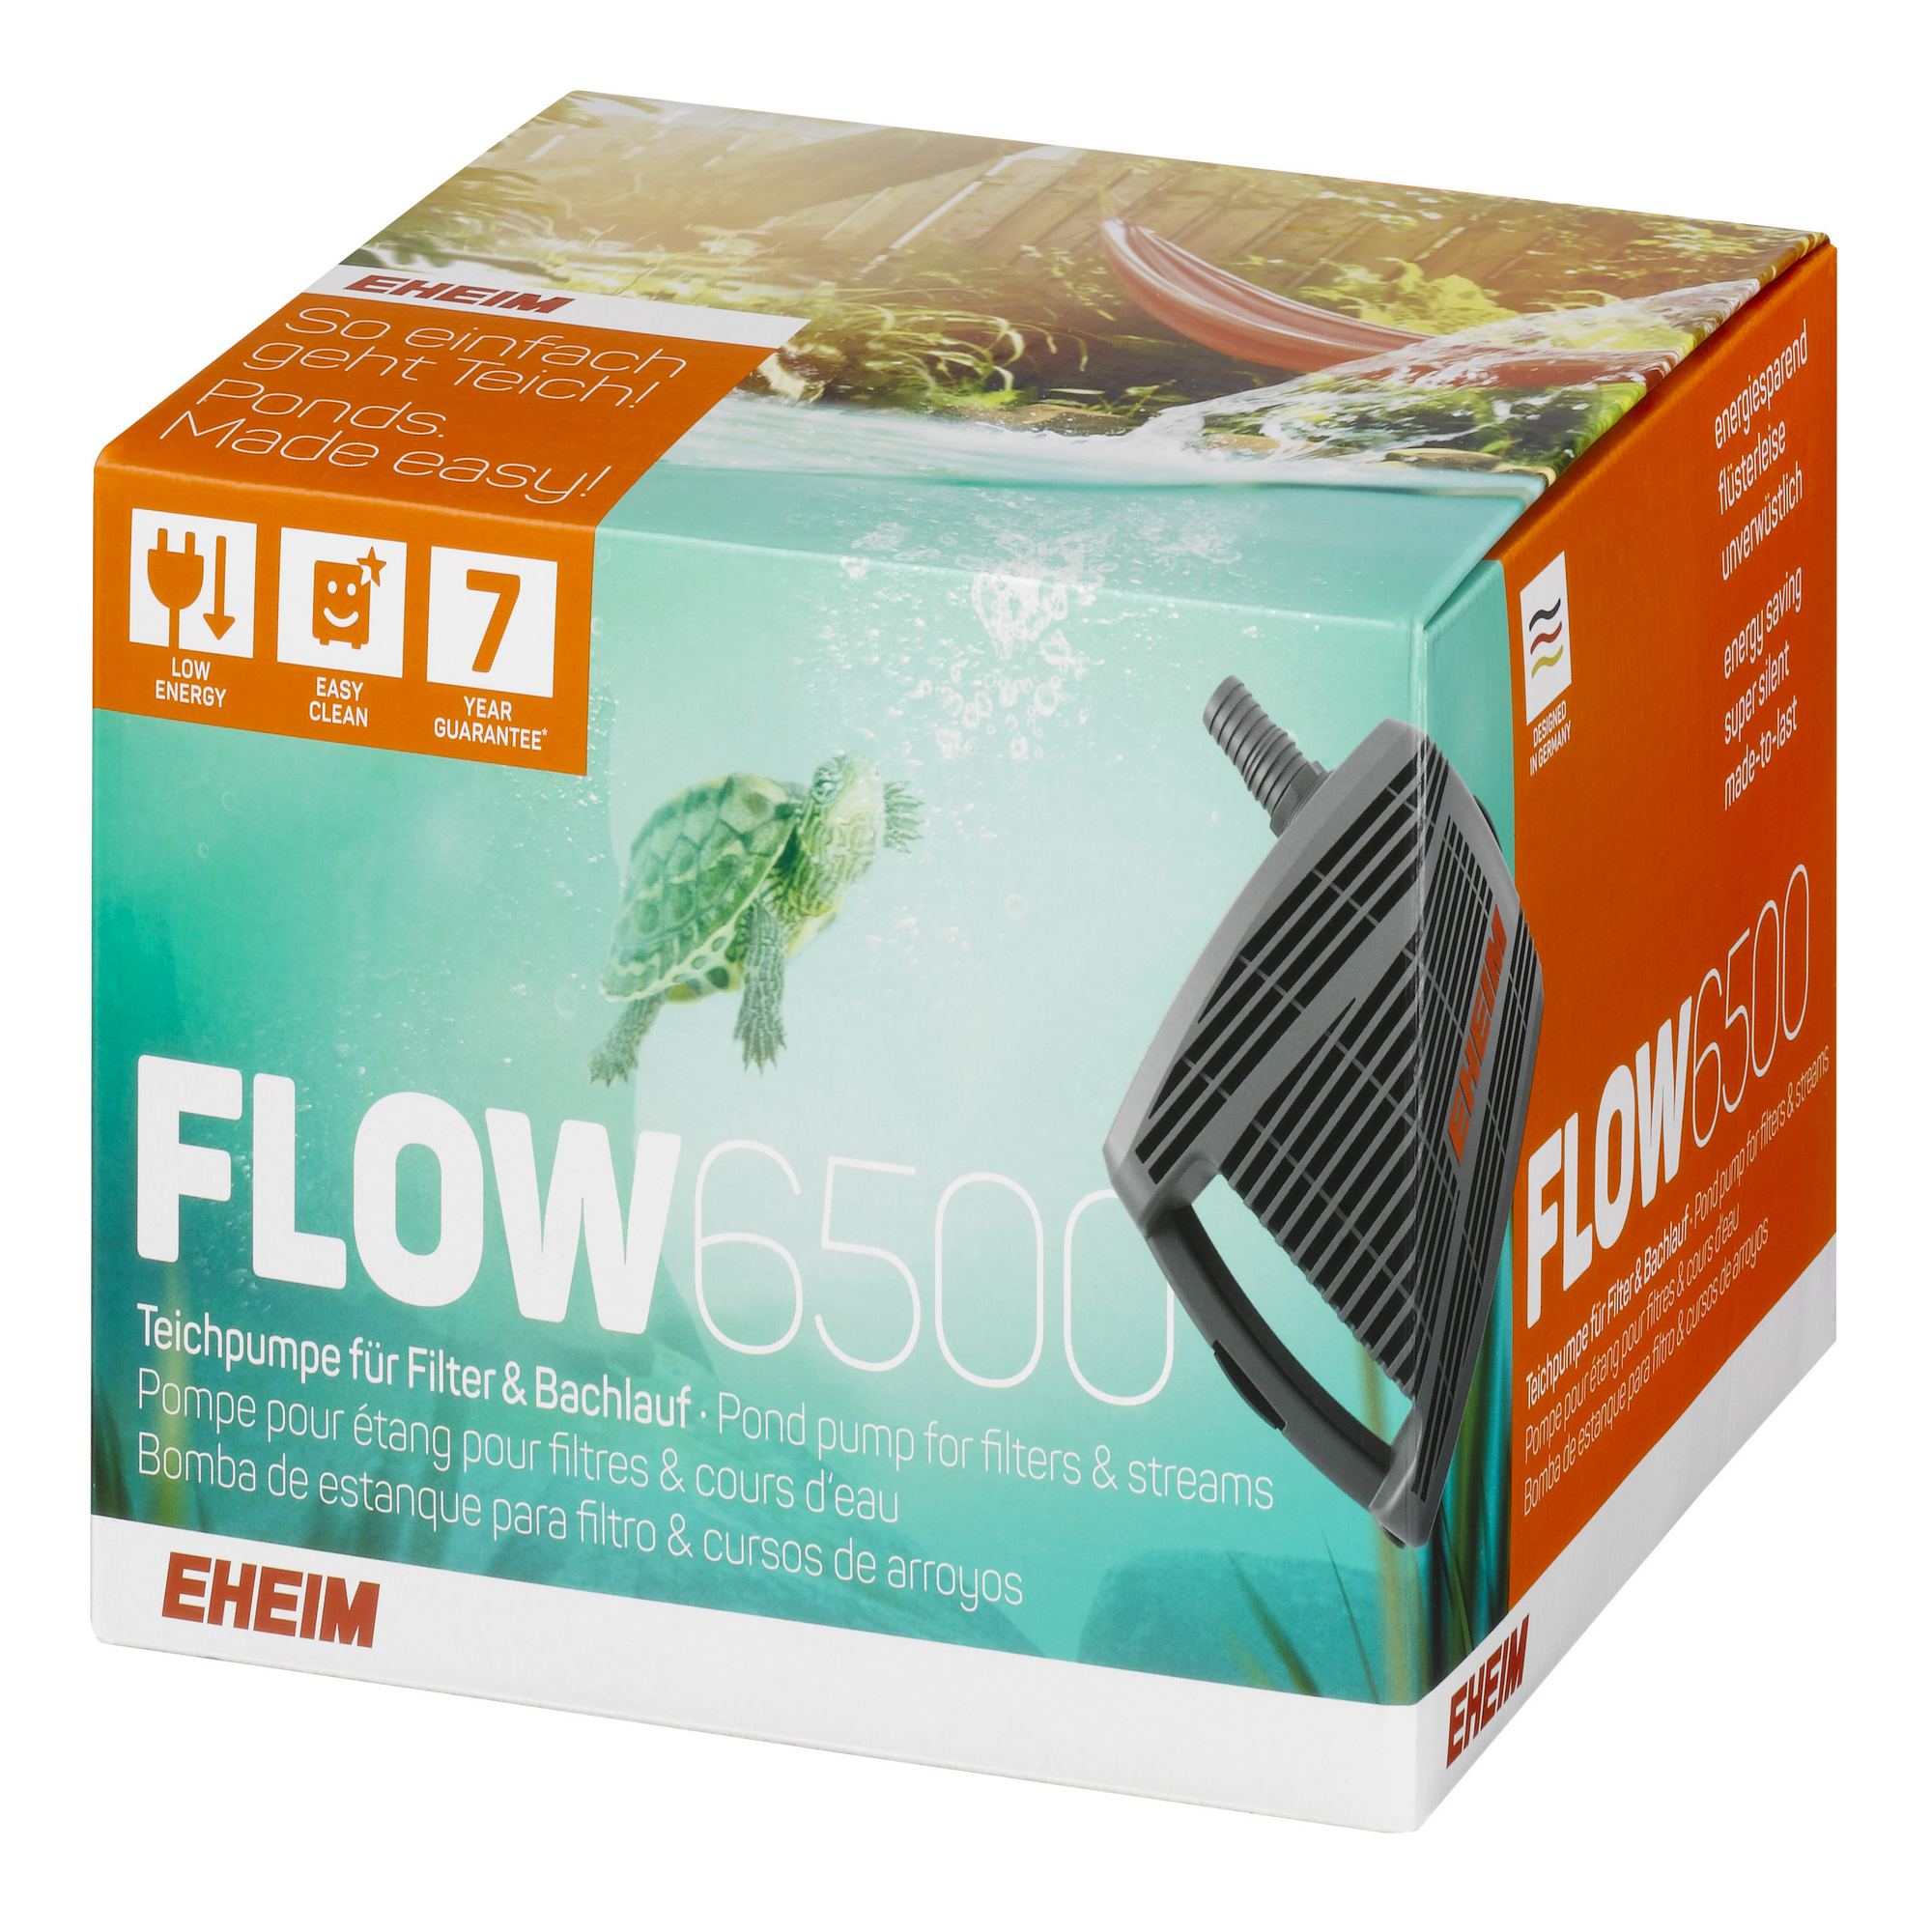 FLOW 6500 Teichpumpe + product picture